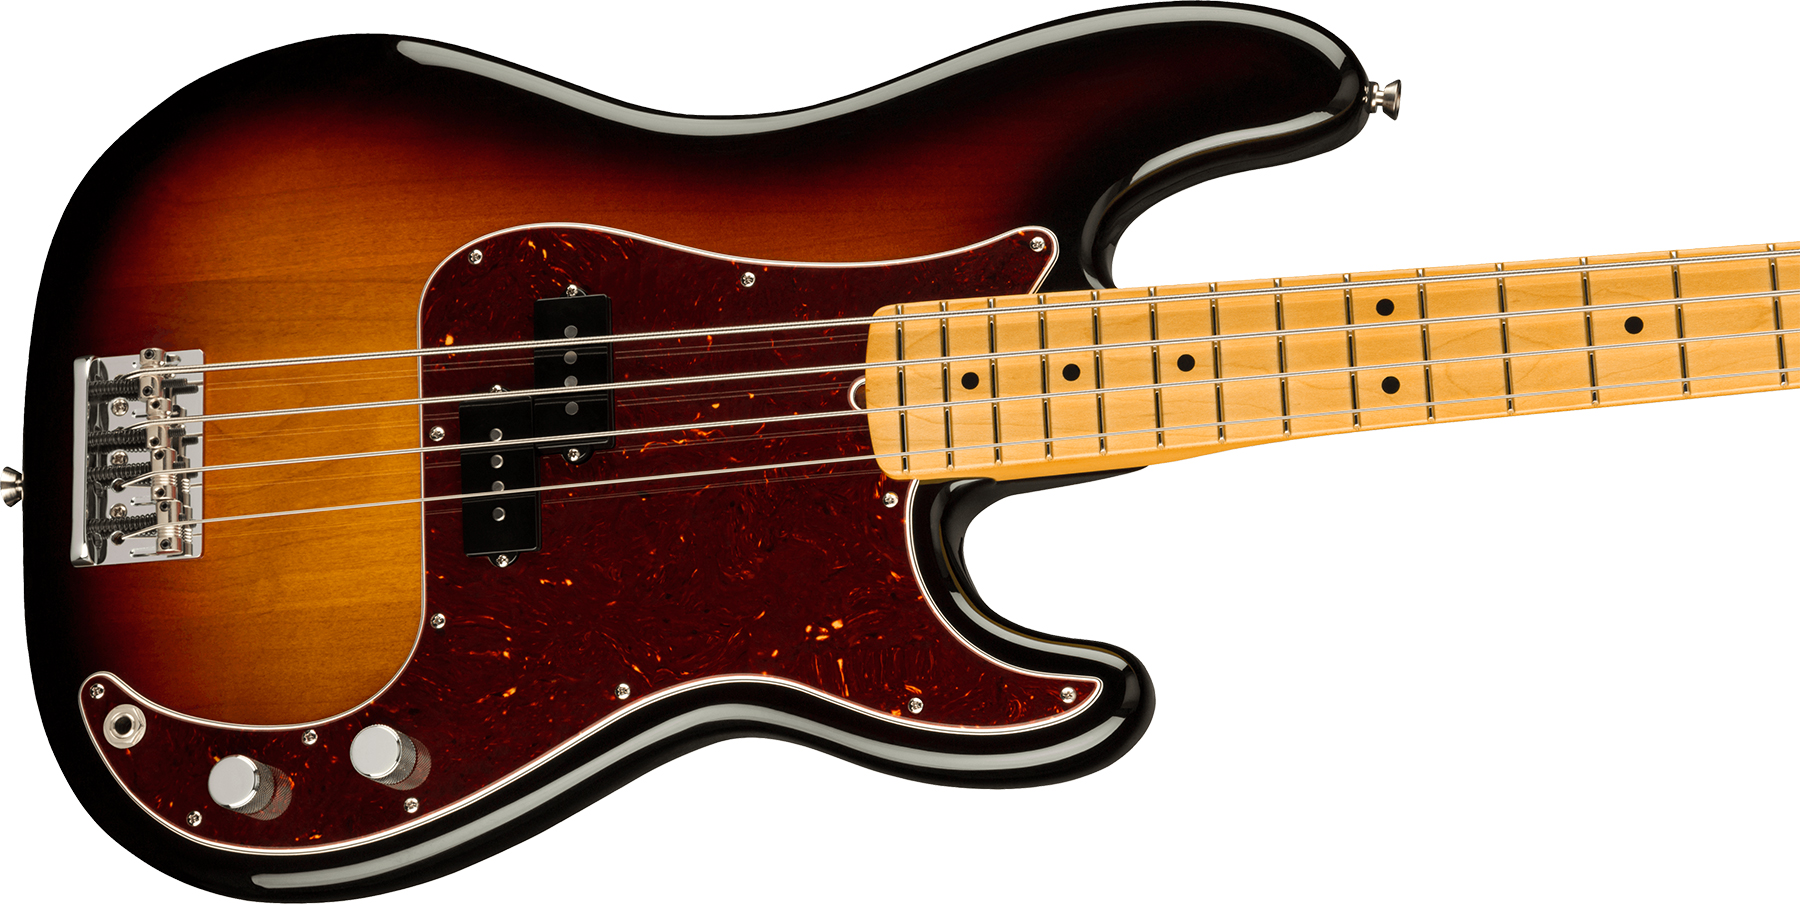 Fender Precision Bass American Professional Ii Usa Mn - 3-color Sunburst - Solid body electric bass - Variation 2